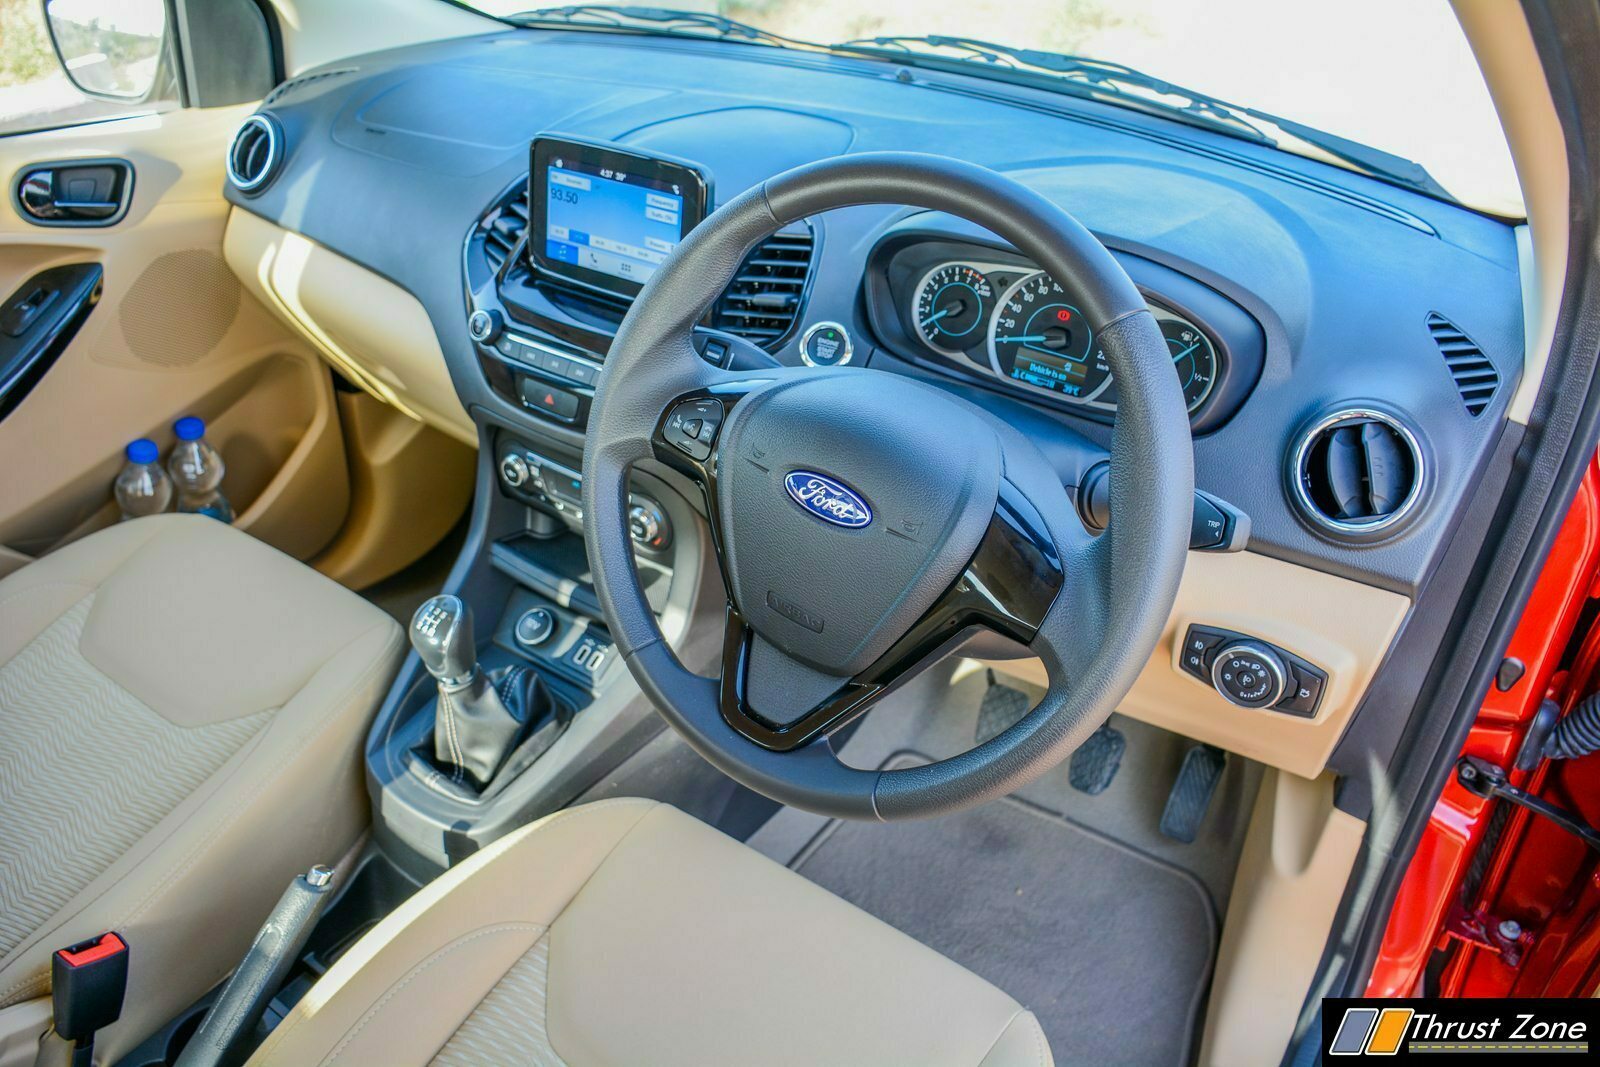 2018 Ford Aspire Facelift Interior Review 7 Thrust Zone